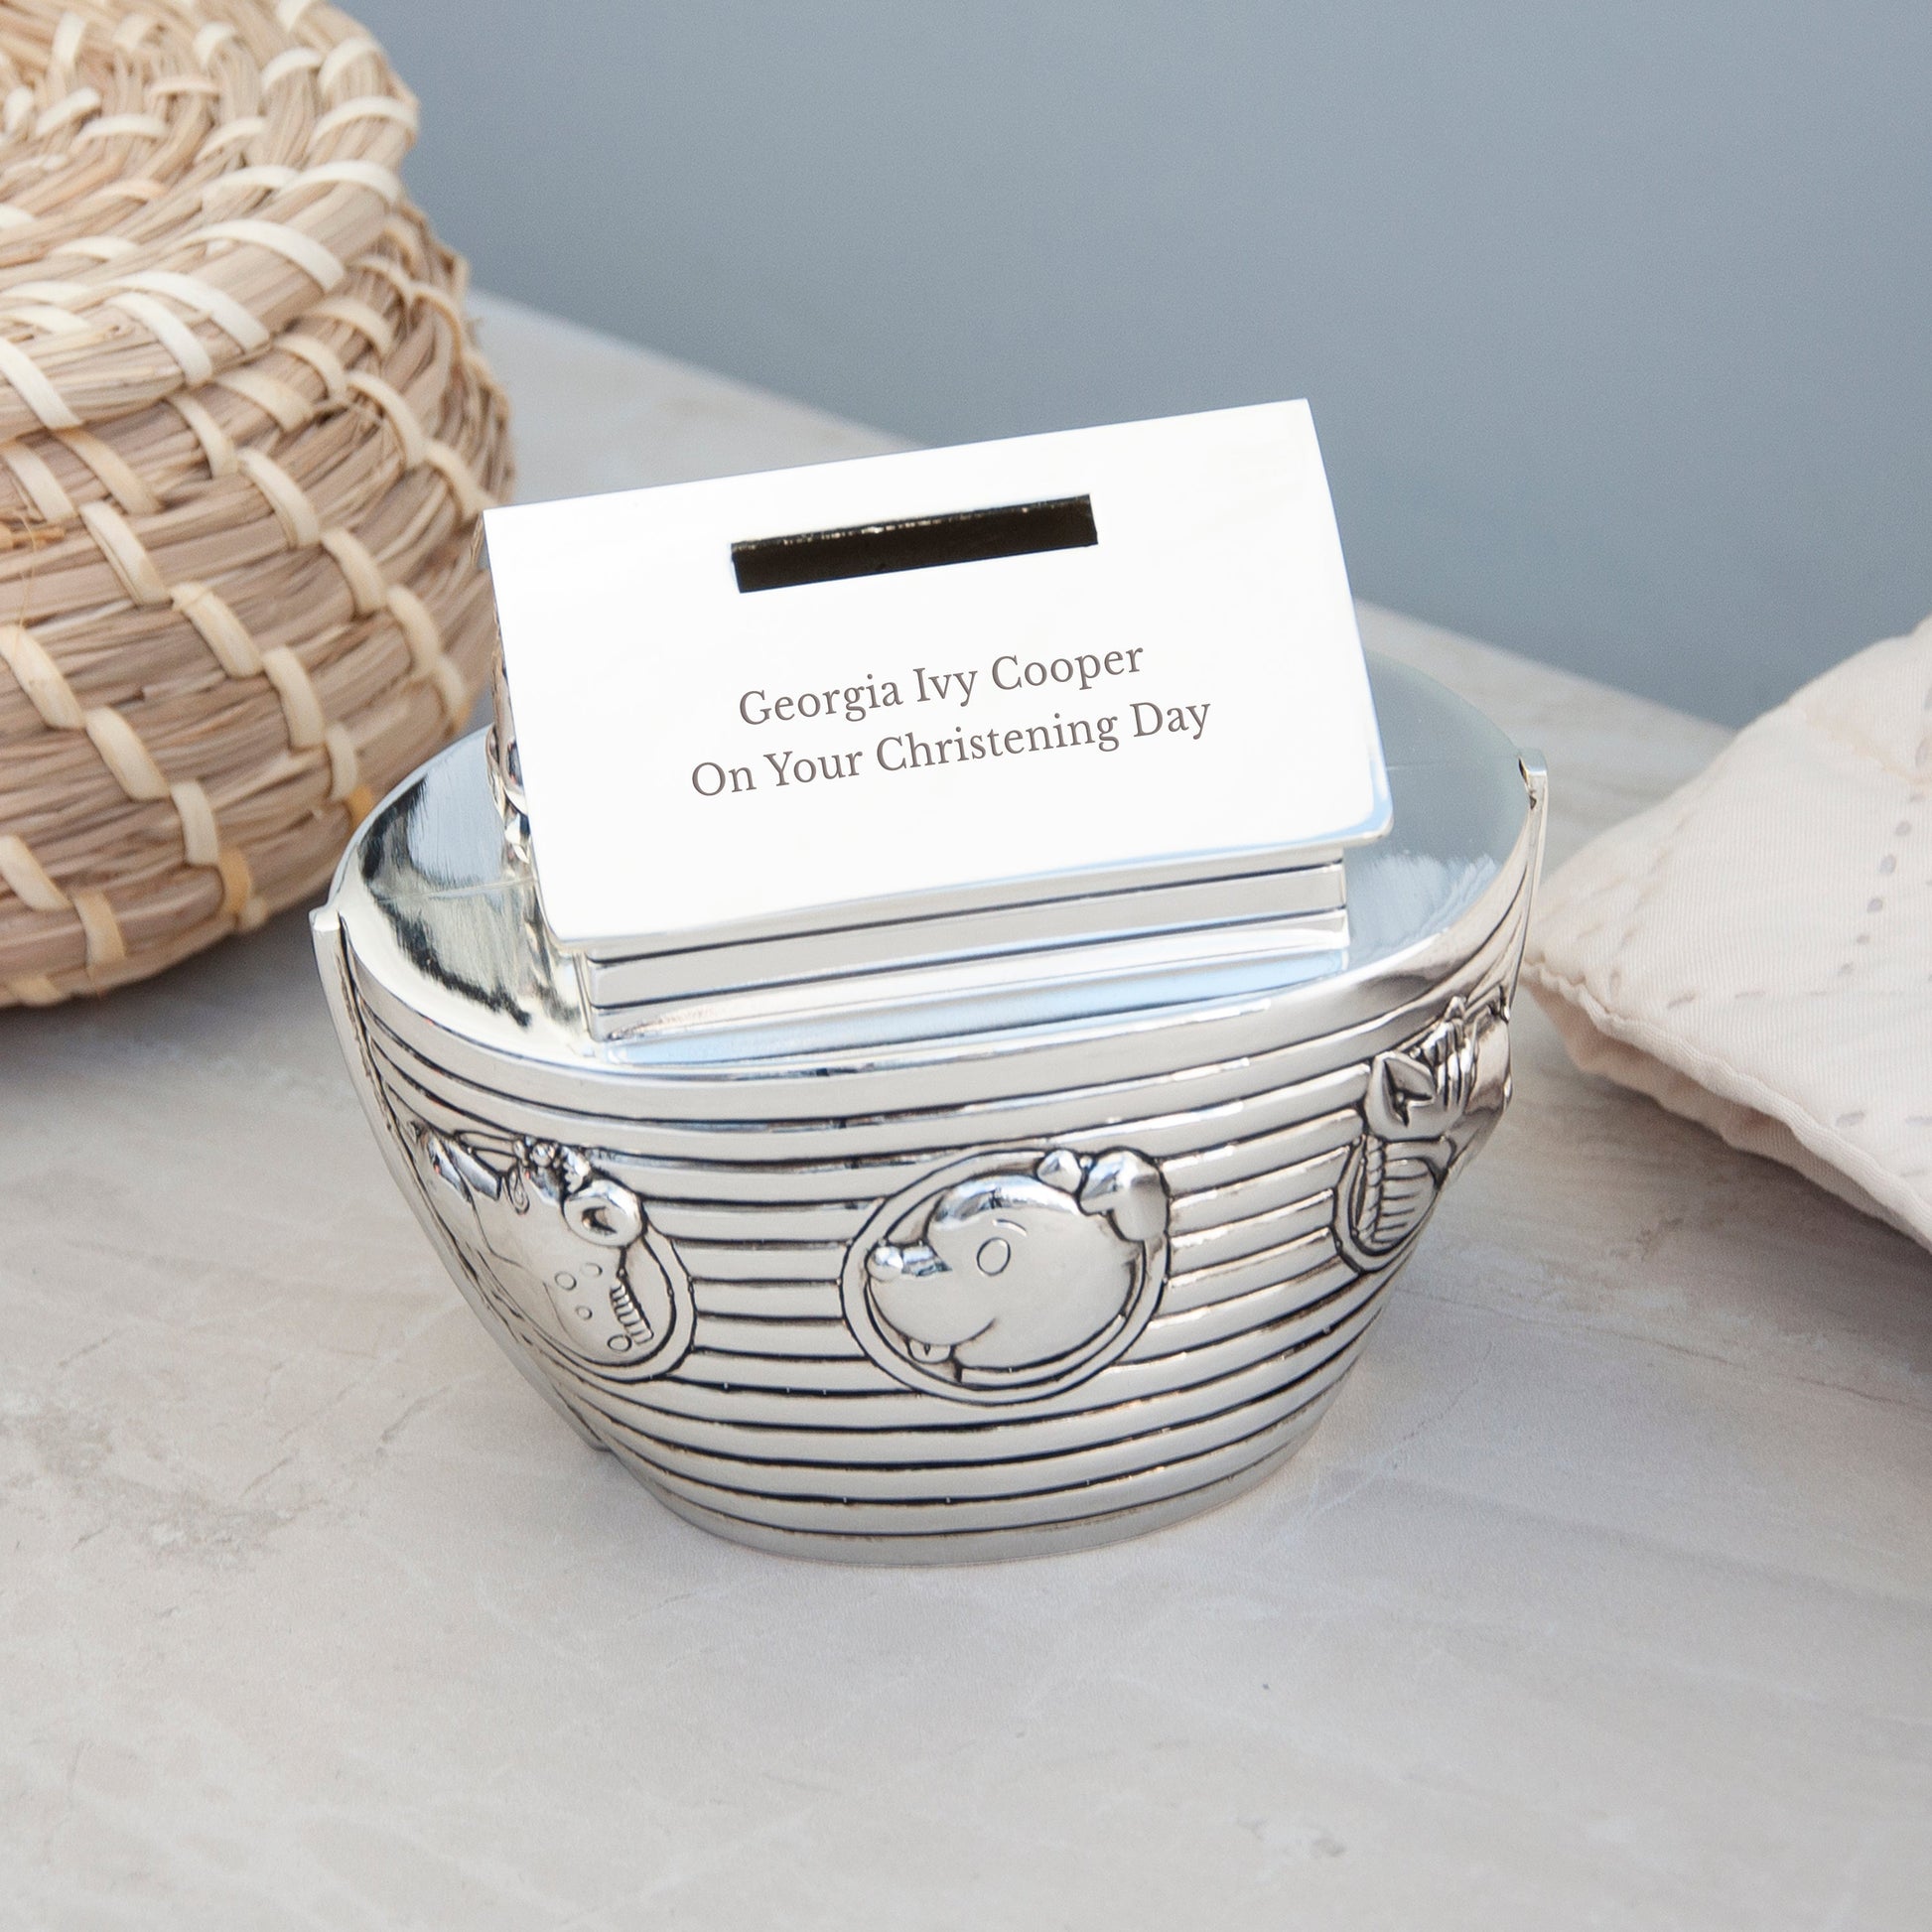 Personalized Money Boxes - Personalized Silver Plated Noah’s Ark Money Box 